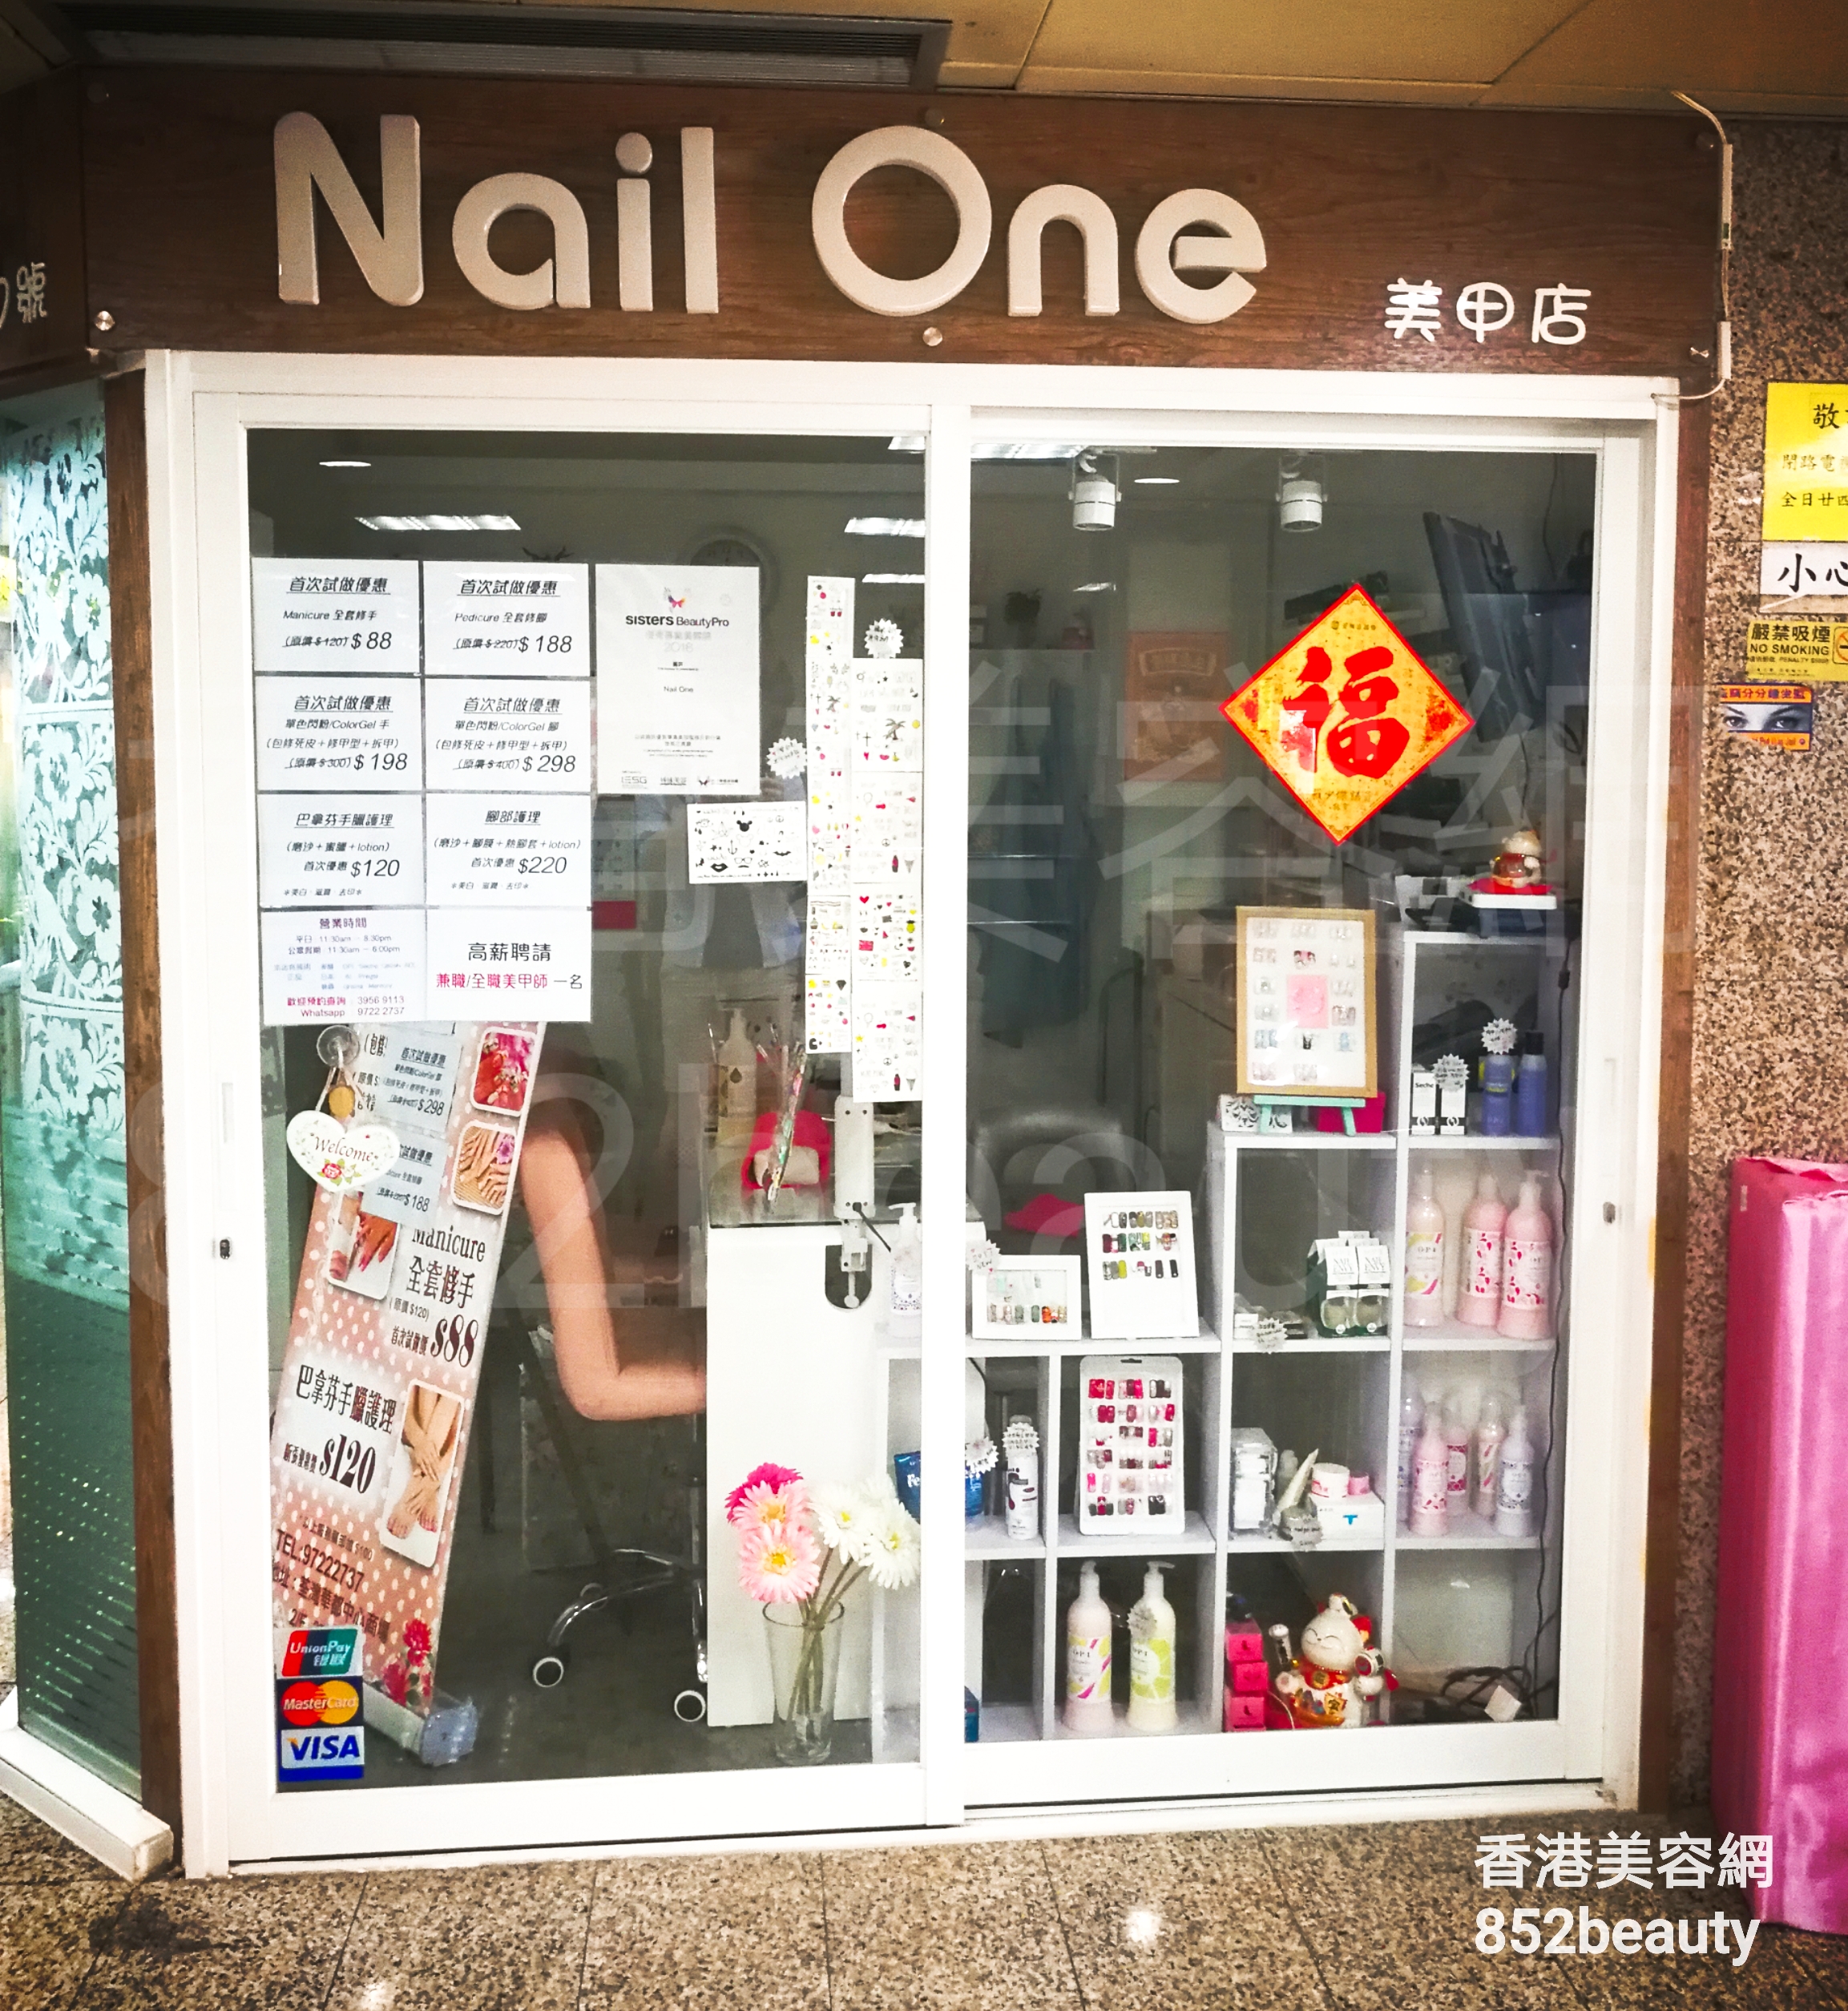 Hand and foot care: Nail One 美甲店